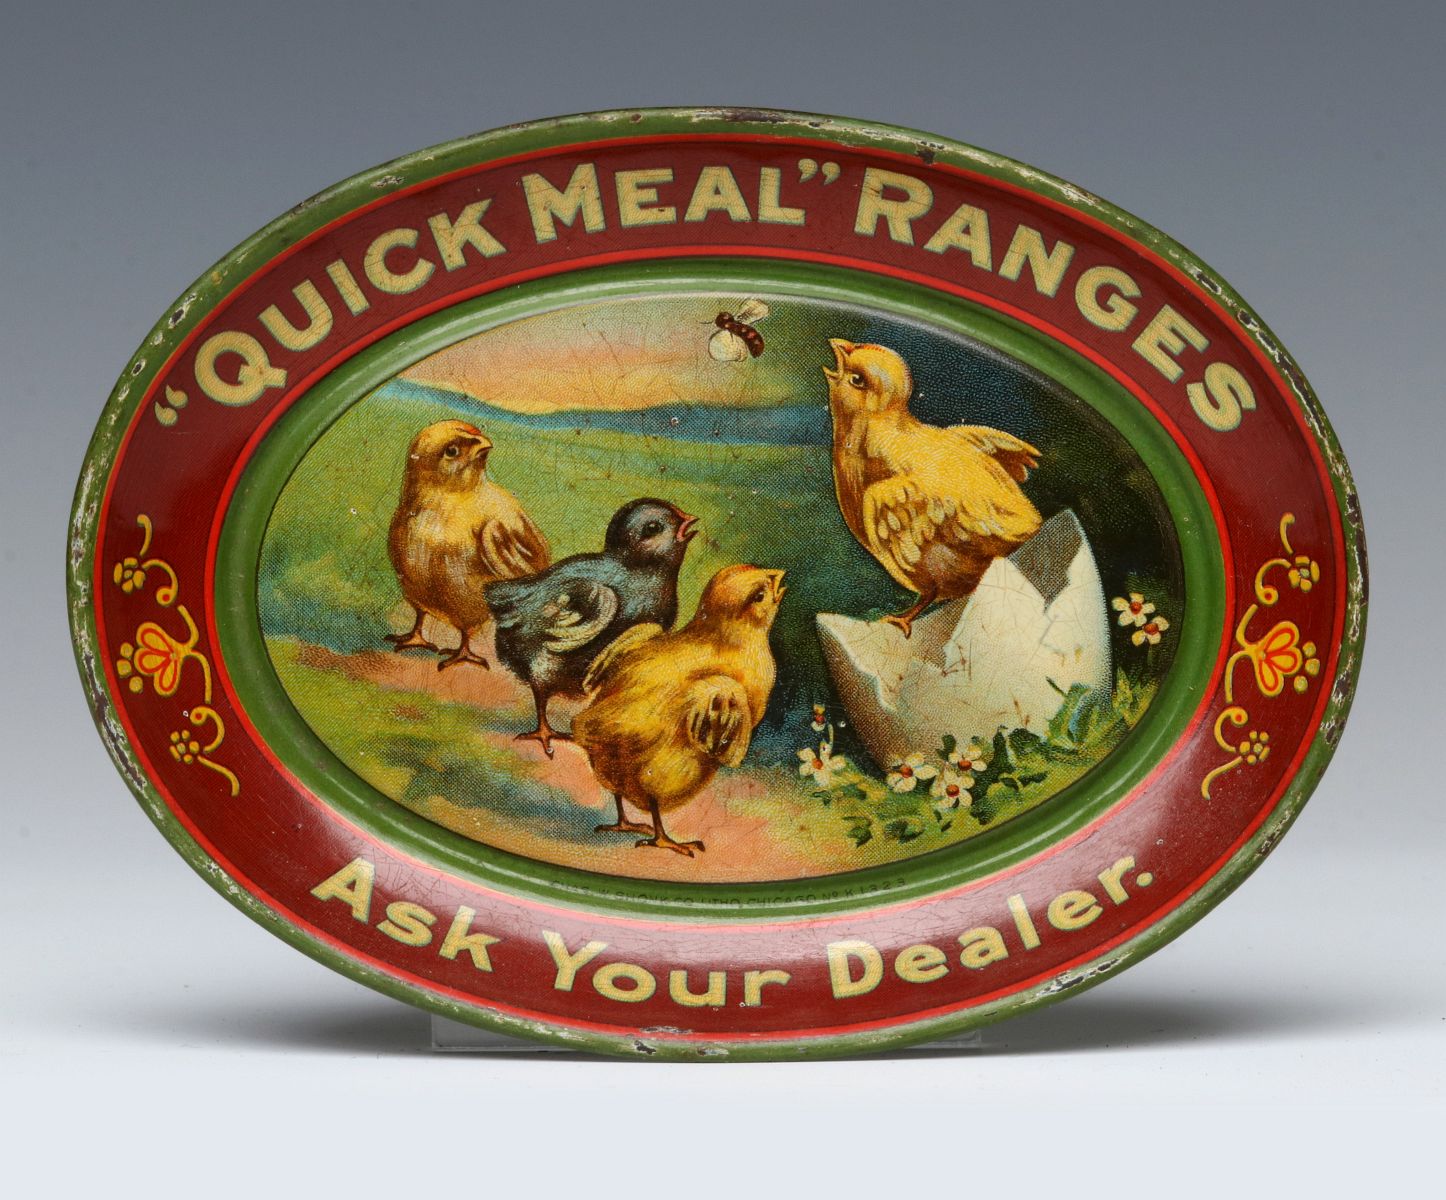 A 'QUICK MEAL' BRAND RANGES ADVERTISING TIP TRAY